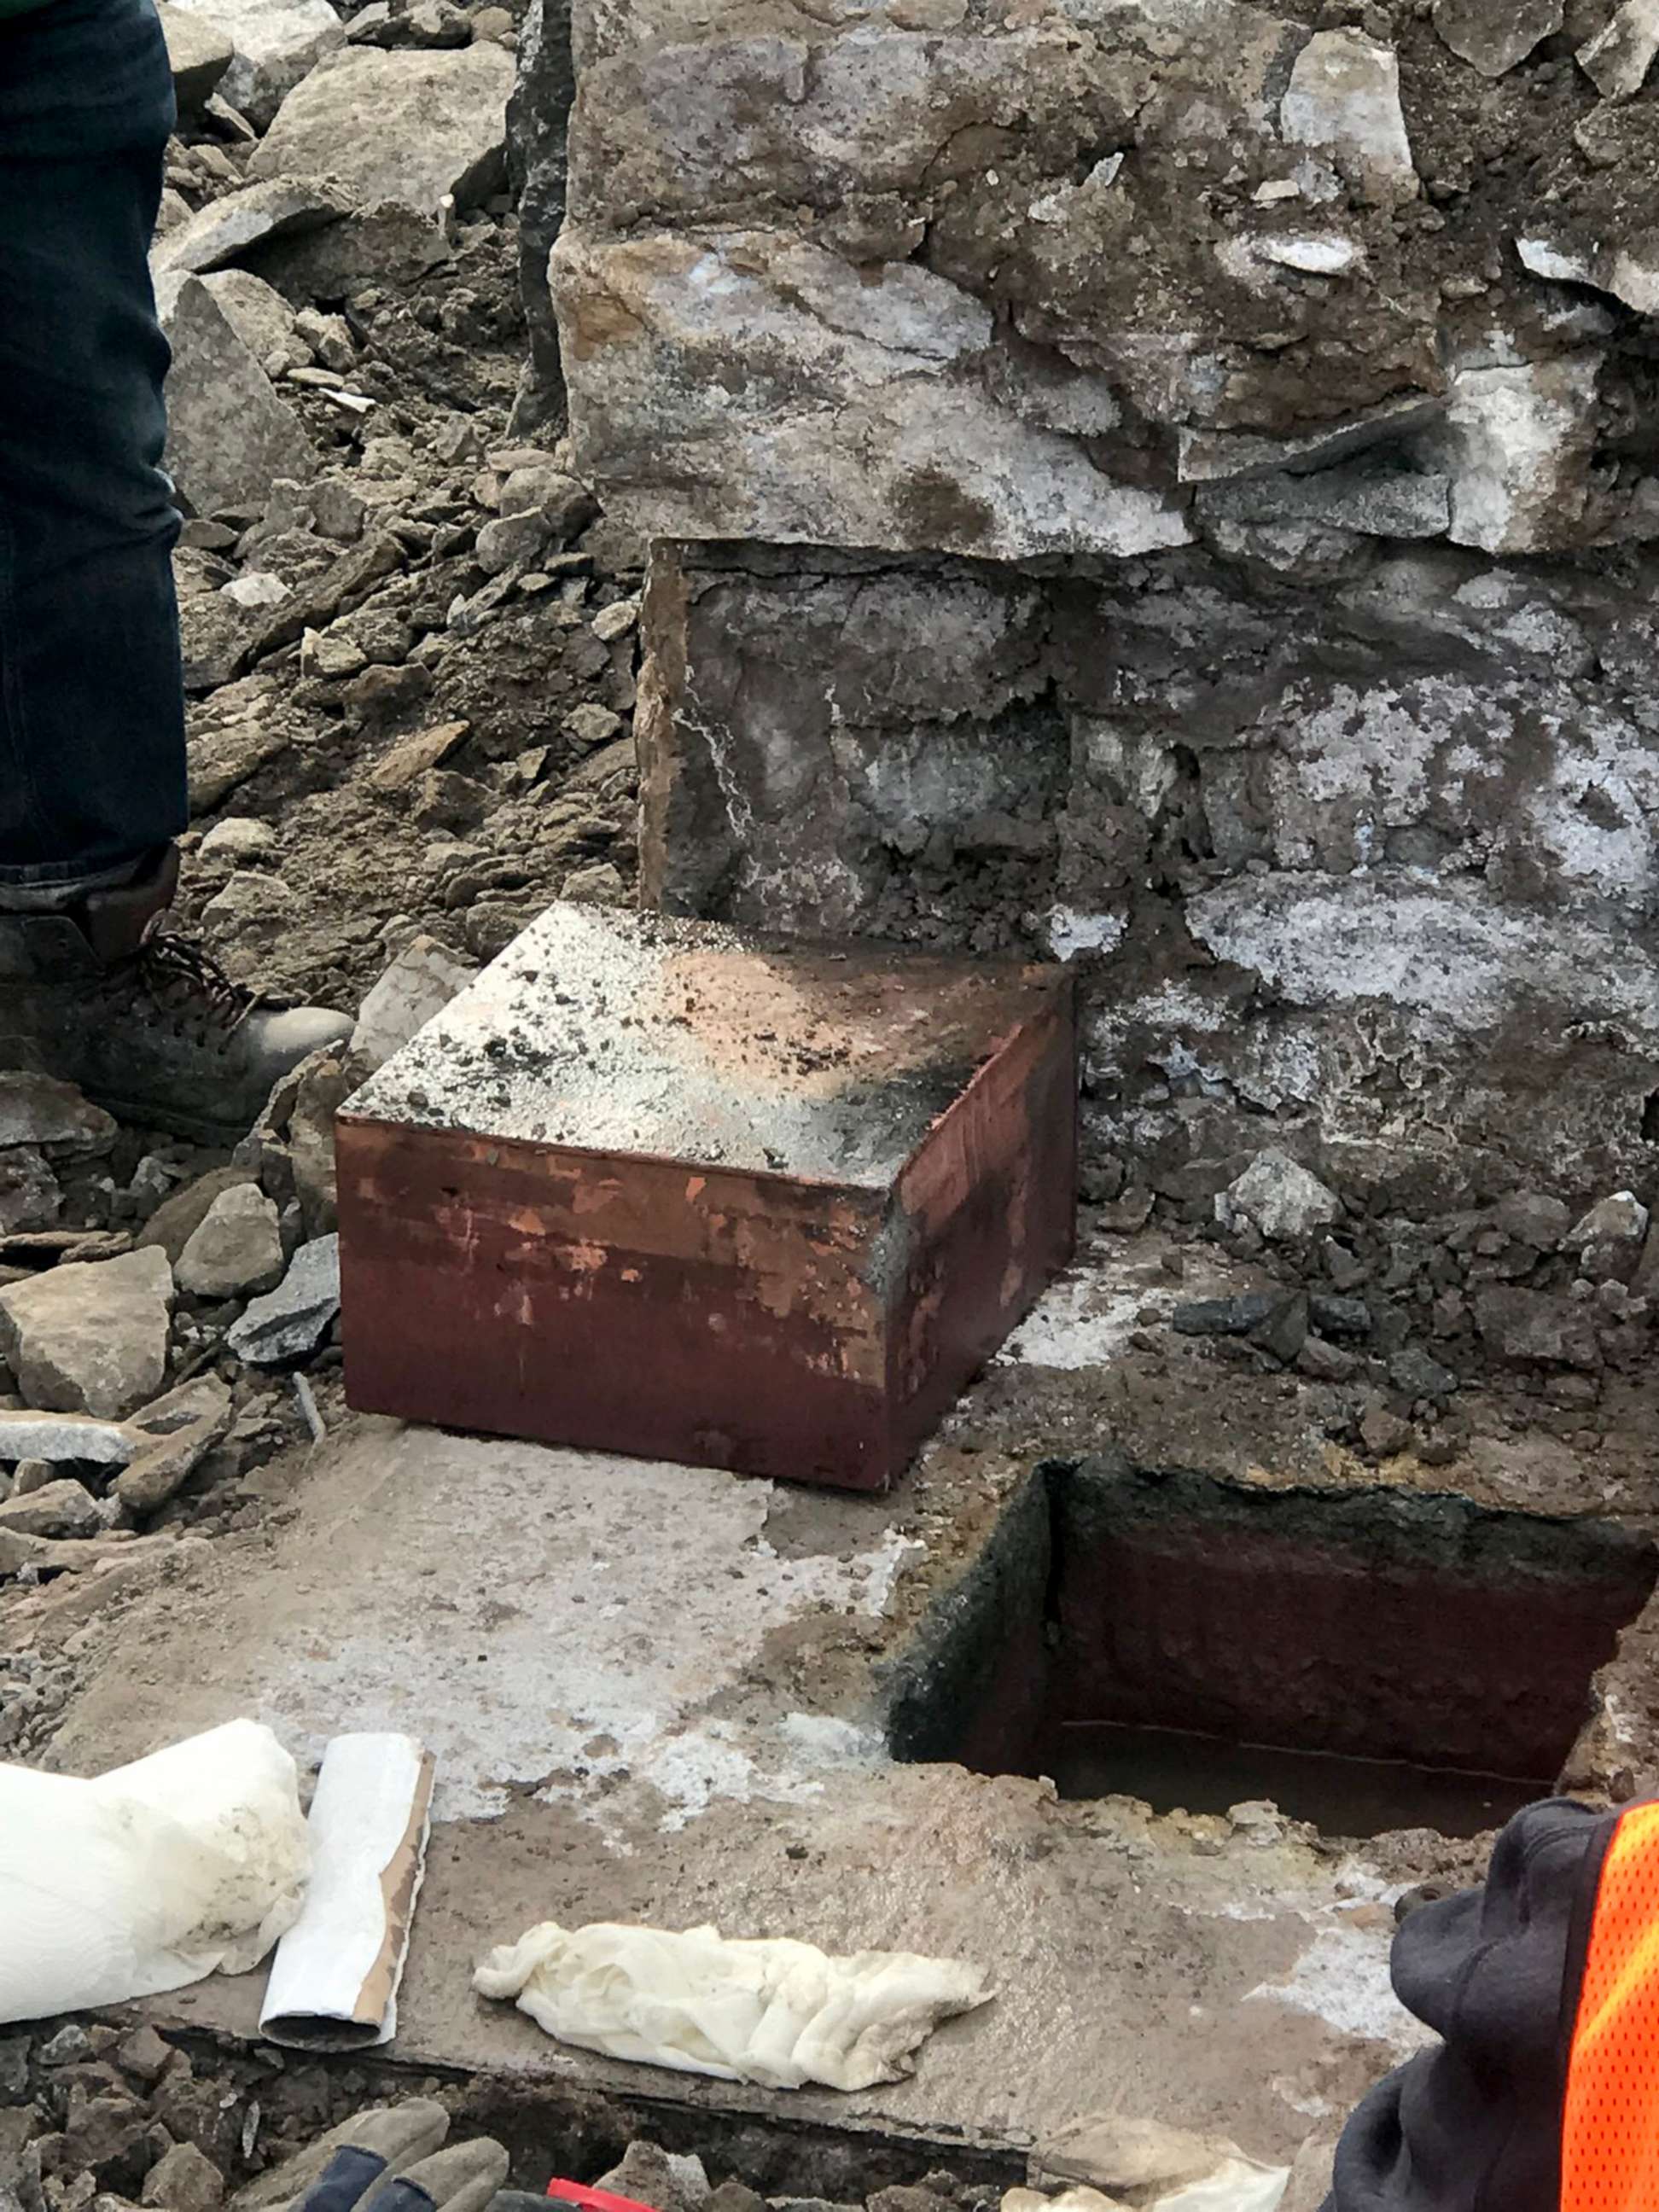 PHOTO: Governor Ralph Northam announced the discovery of what is believed to be the authentic time capsule from the Robert E. Lee monument in Richmond, Va., via Twitter on Dec. 27, 2021.